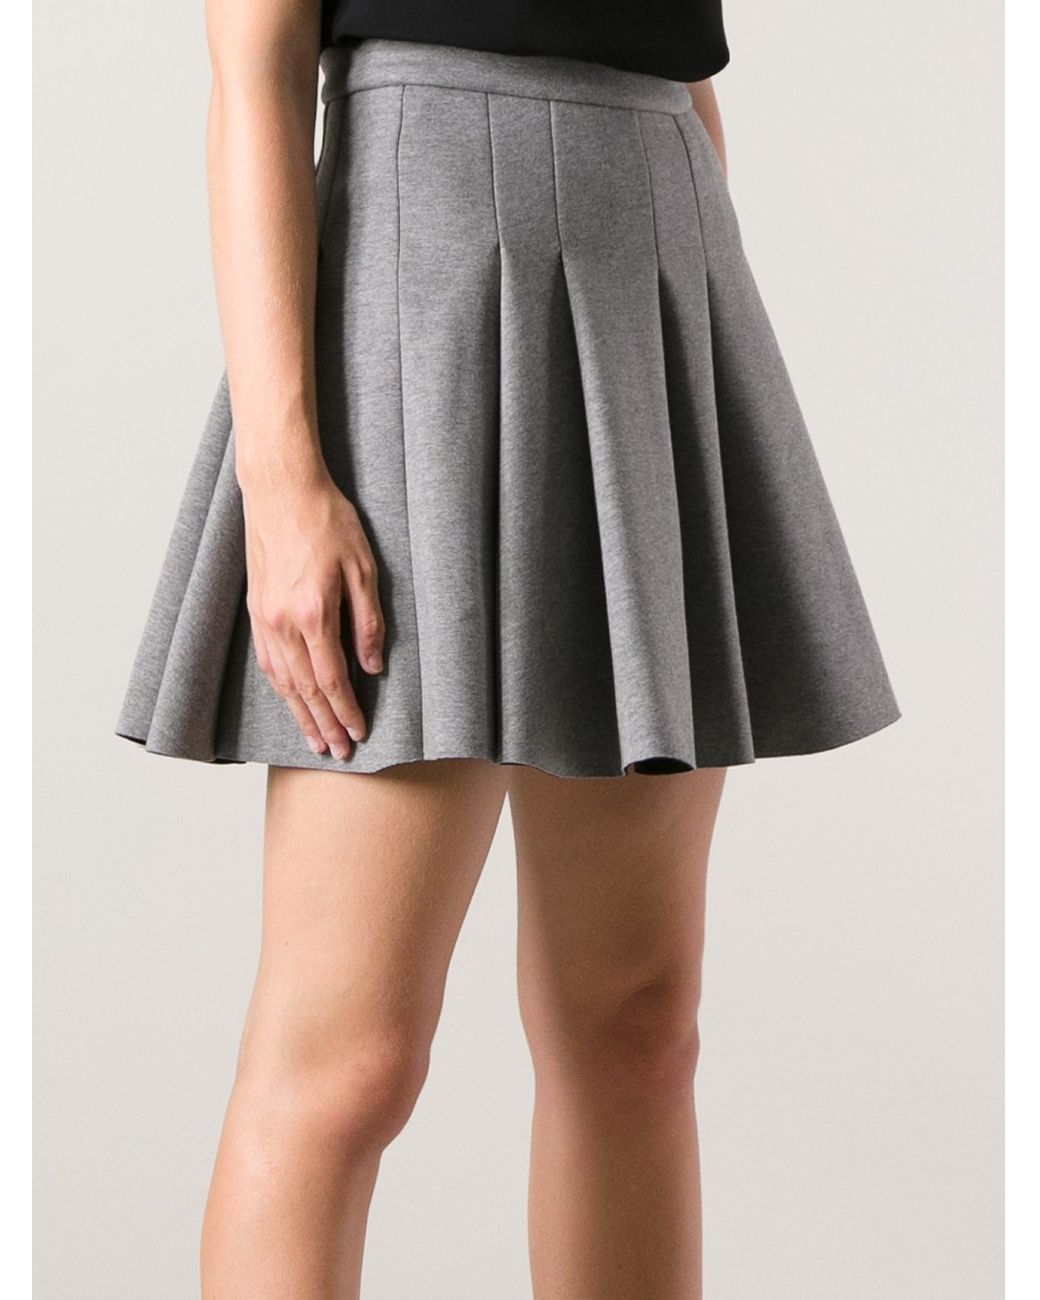 T By Alexander Wang Pleated Skirt in Gray | Lyst